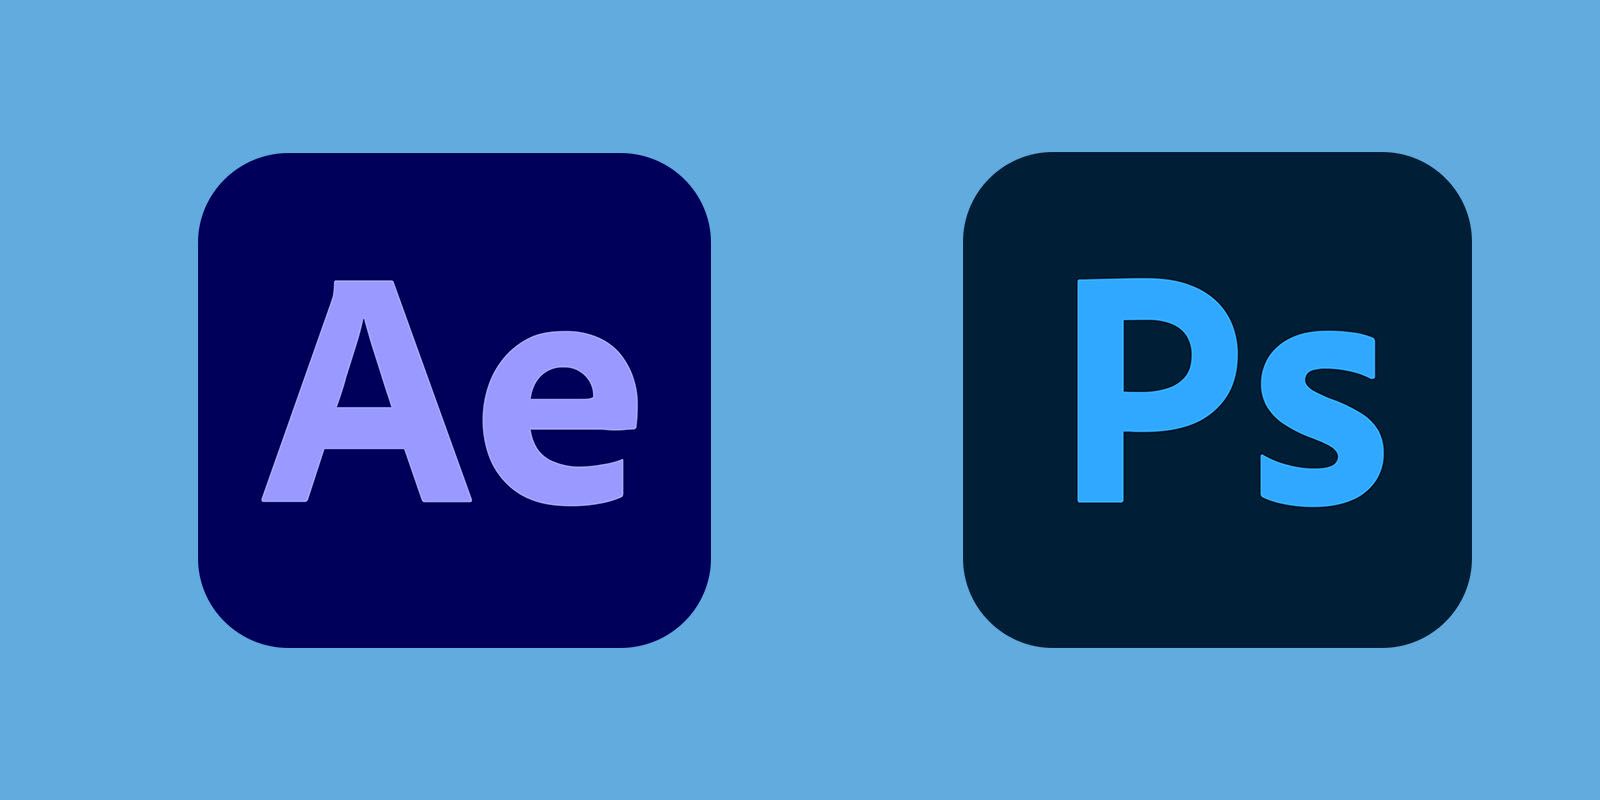 Adobe Photoshop and After Effects logos on a blue background